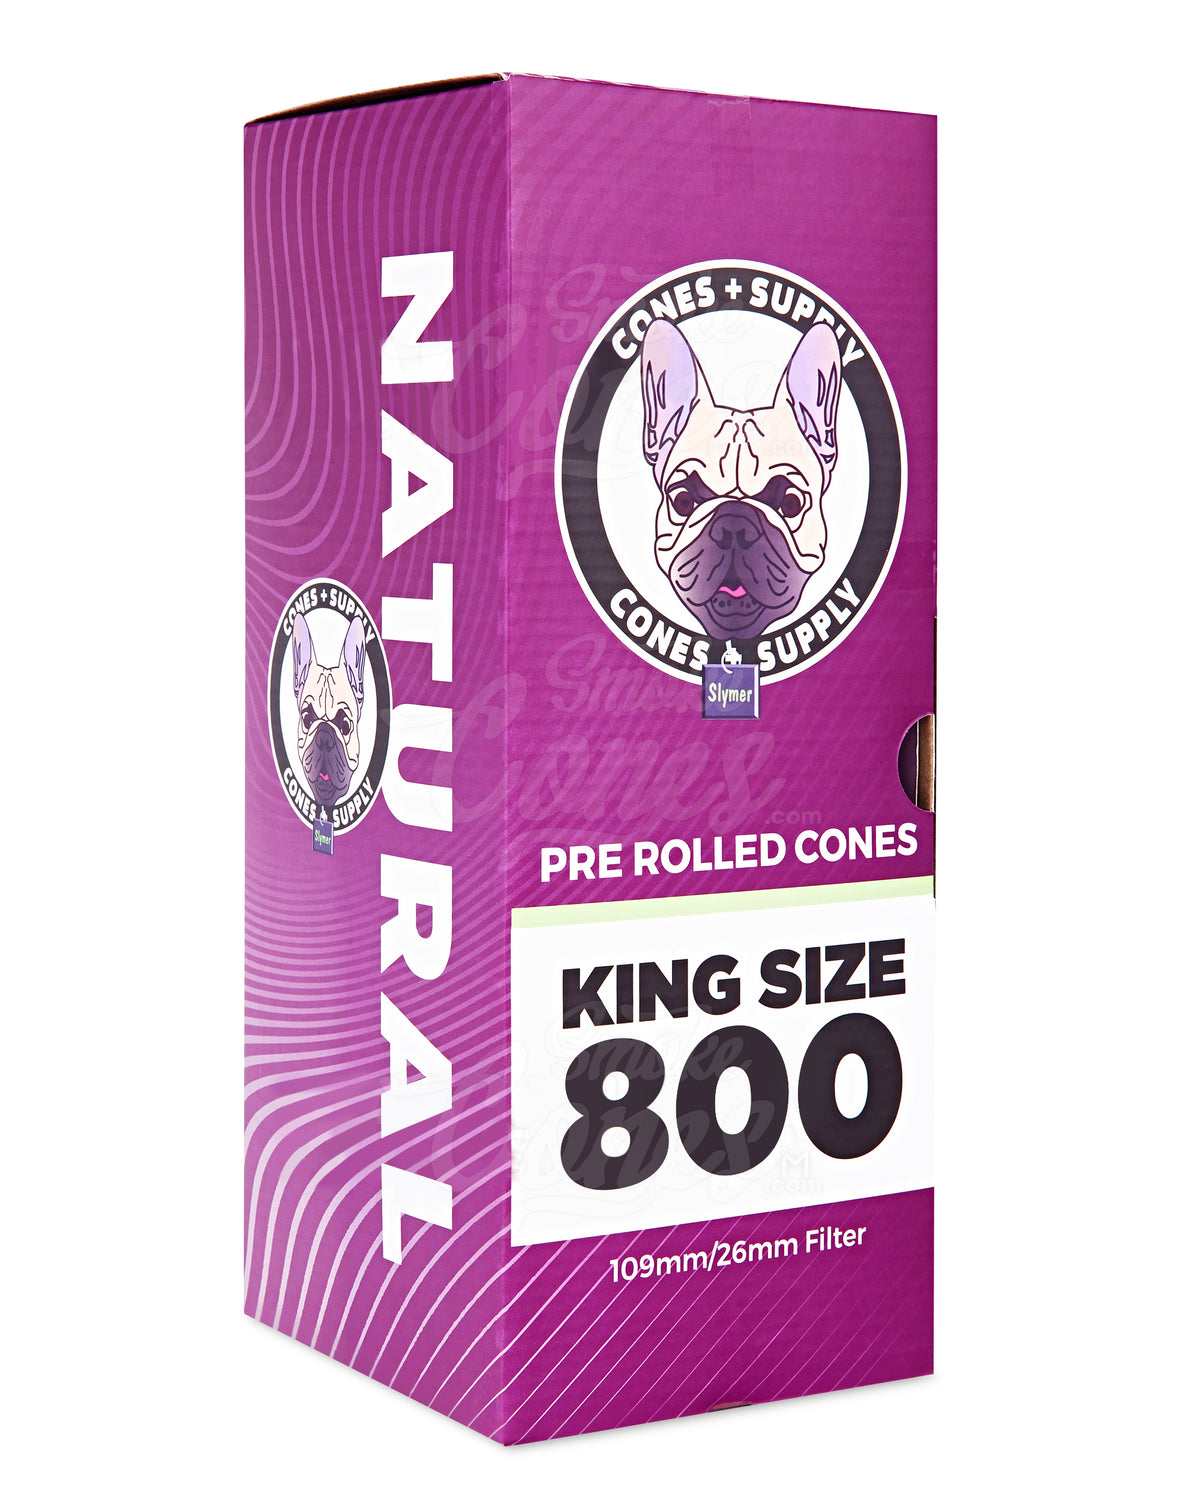 Cones + Supply King Size Pre Rolled Natural Paper Cones 900/Box